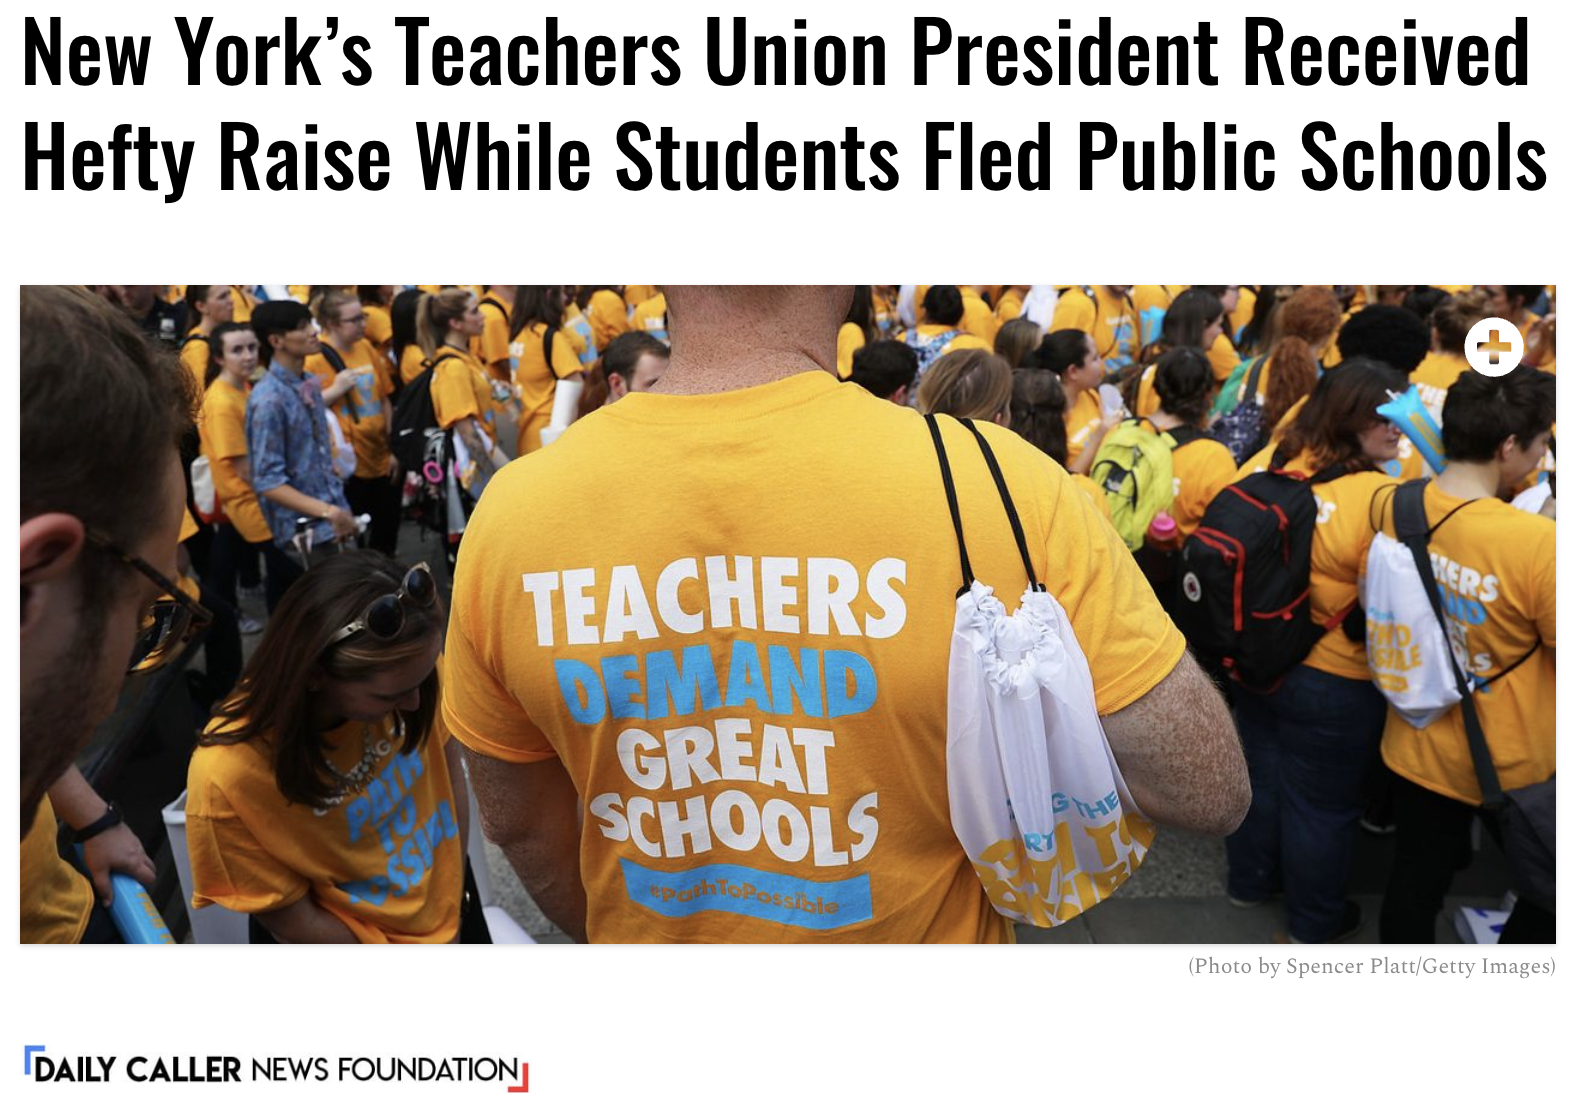 AFFT in The Daily Caller: New York’s Teachers Union President Received Hefty Raise While Students Fled Public Schools